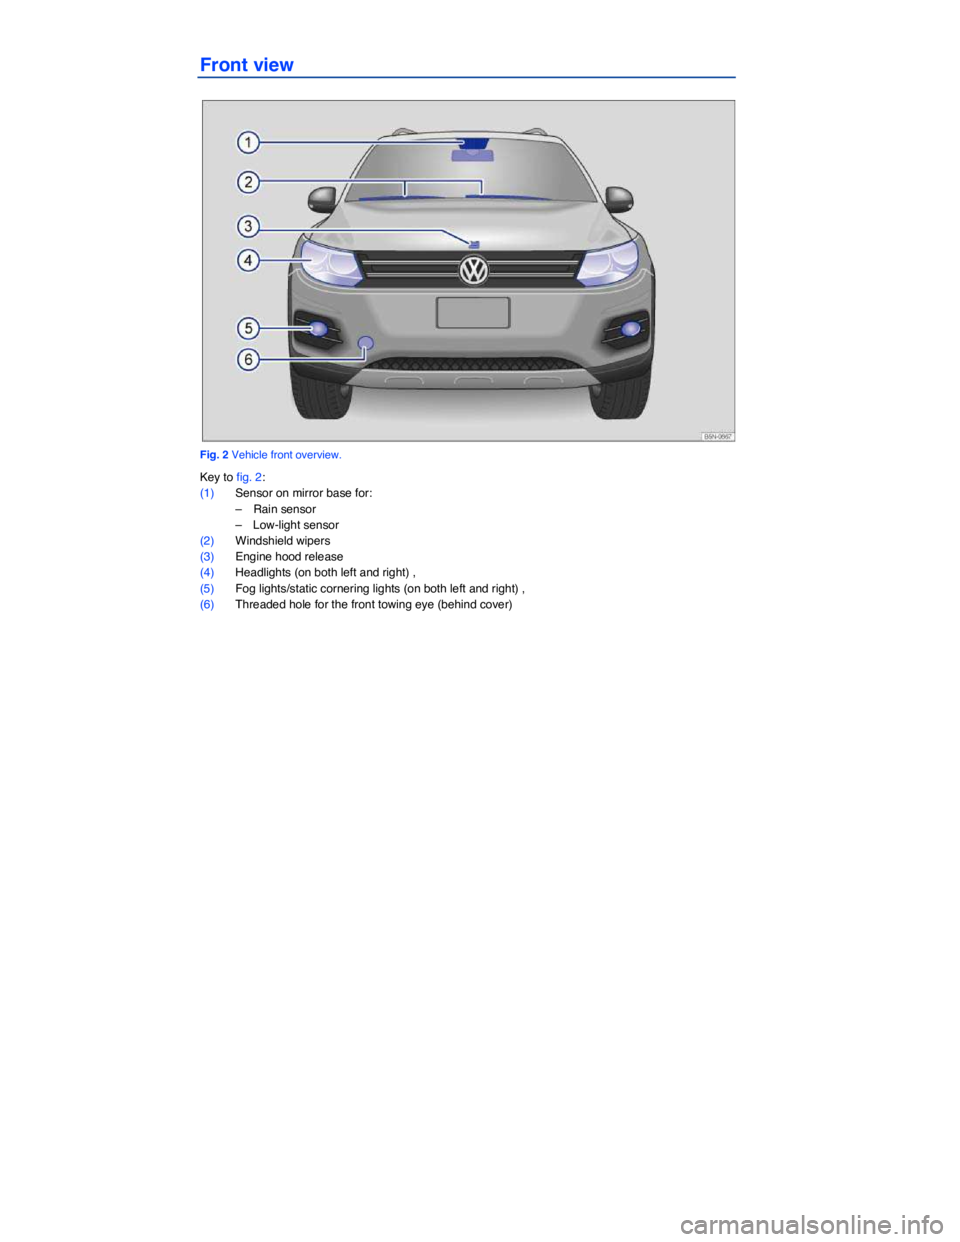 VOLKSWAGEN TIGUAN 2015  Owner´s Manual  
Front view 
 
Fig. 2 Vehicle front overview. 
Key to fig. 2: 
(1) Sensor on mirror base for: 
–  Rain sensor  
–  Low-light sensor  
(2) Windshield wipers  
(3) Engine hood release  
(4) Headlig